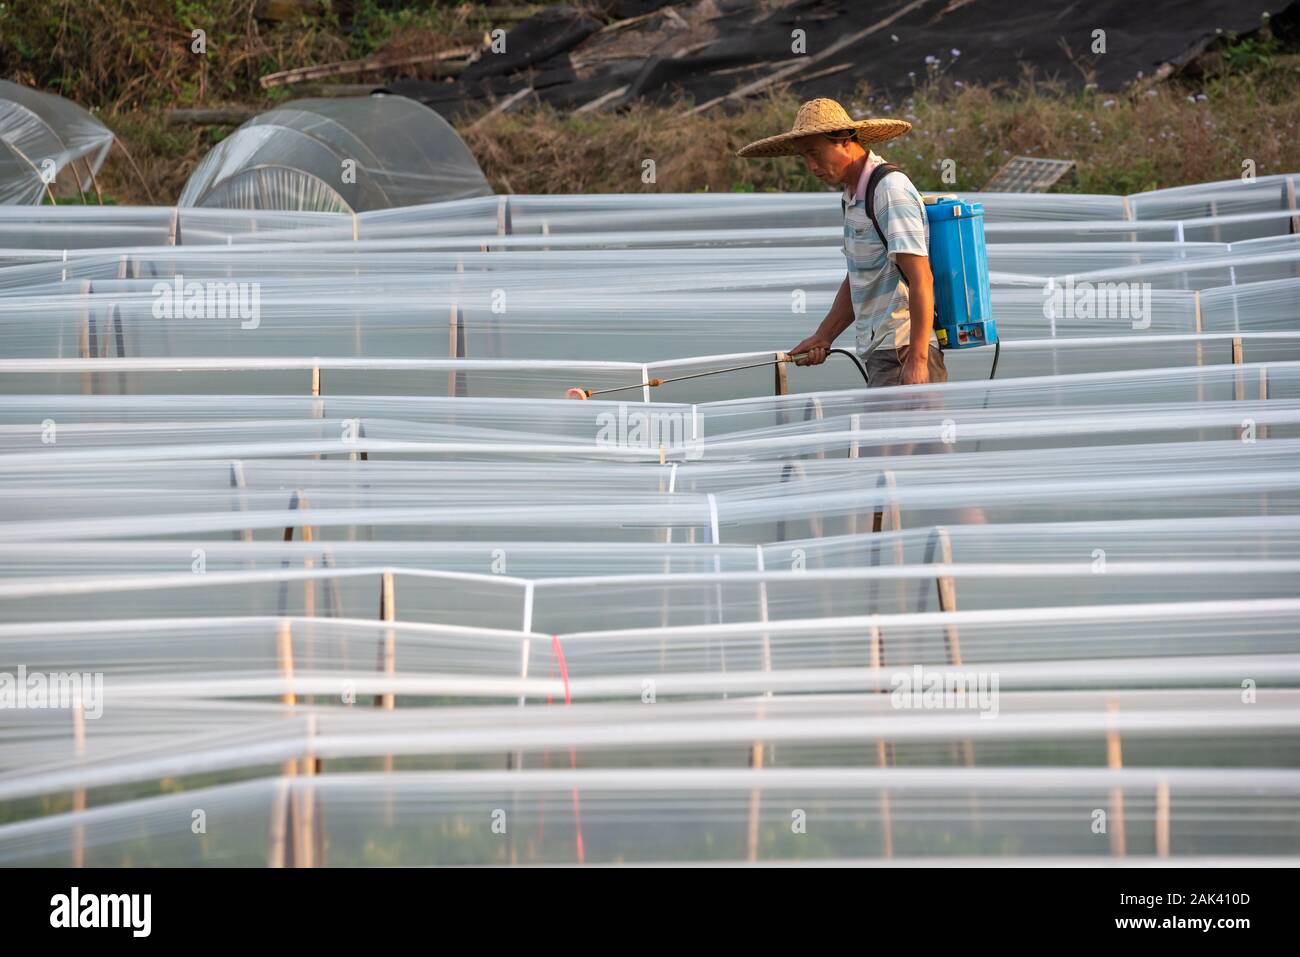 Yangshuo, Guilin, Guangxi province, China - Nov 10, 2019 : Chinese farmer spraying pesticides on plants in greenhouses Stock Photo